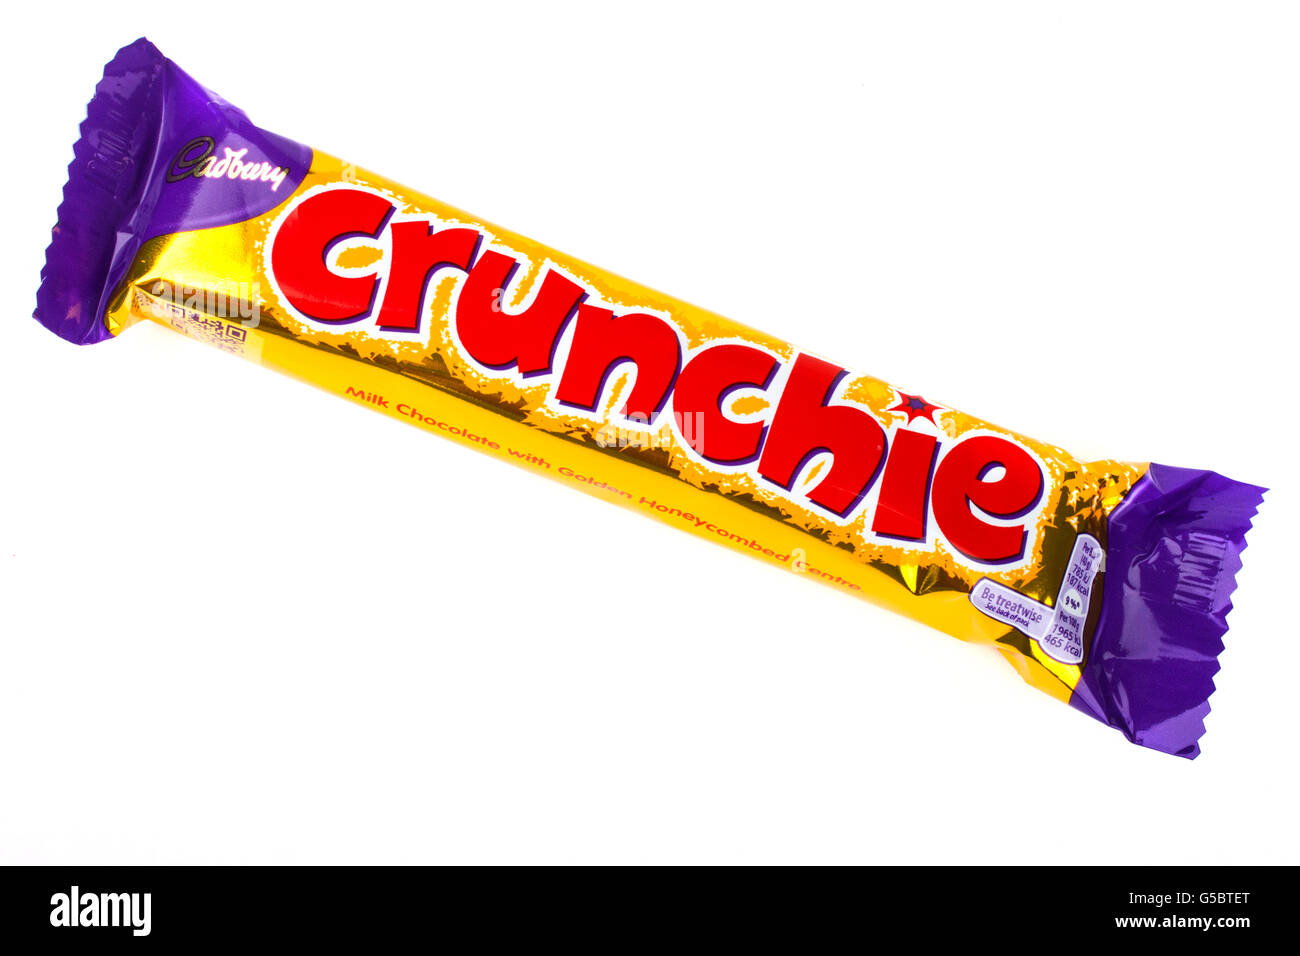 LONDON, UK - JUNE 16TH 2016: An unopened Crunchie chocolate bar manufactured by Cadbury, pictured over a plain white background Stock Photo